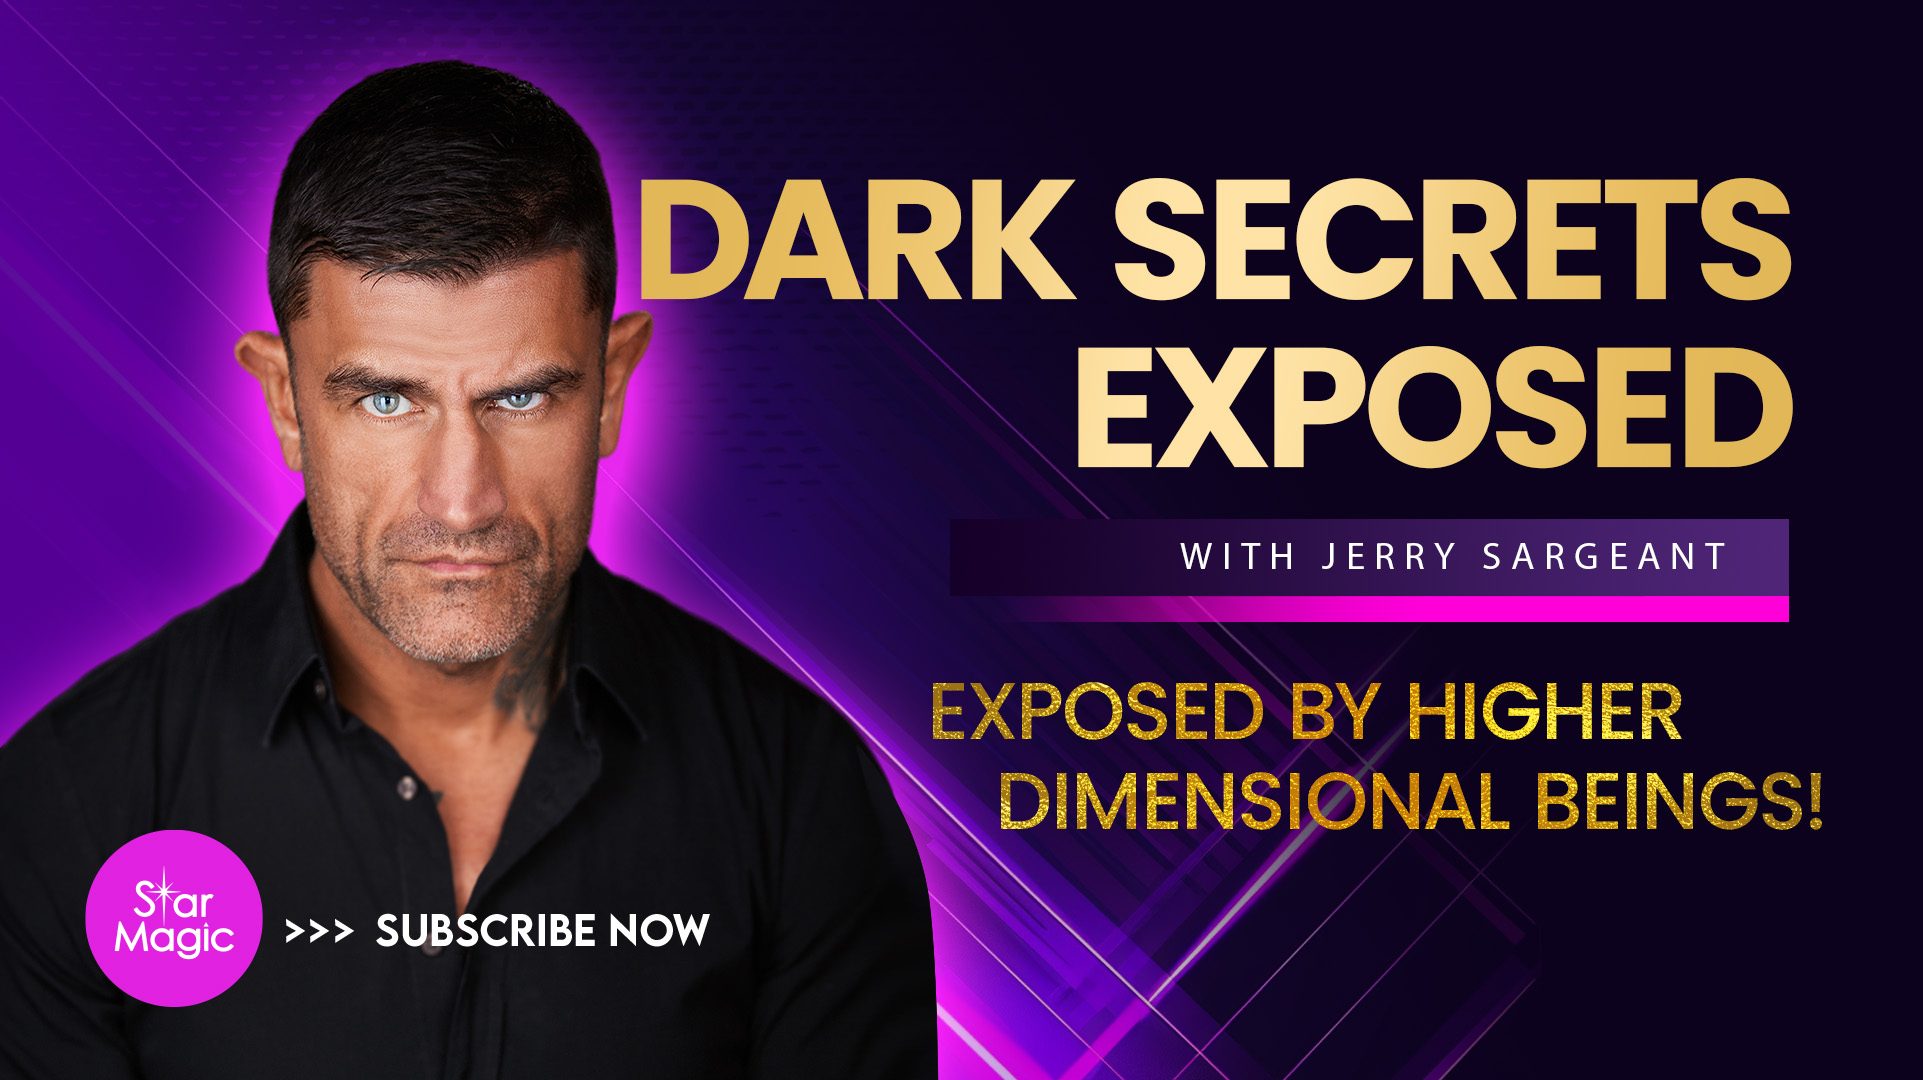 Discover the Dark Secret Keeping You From Healing